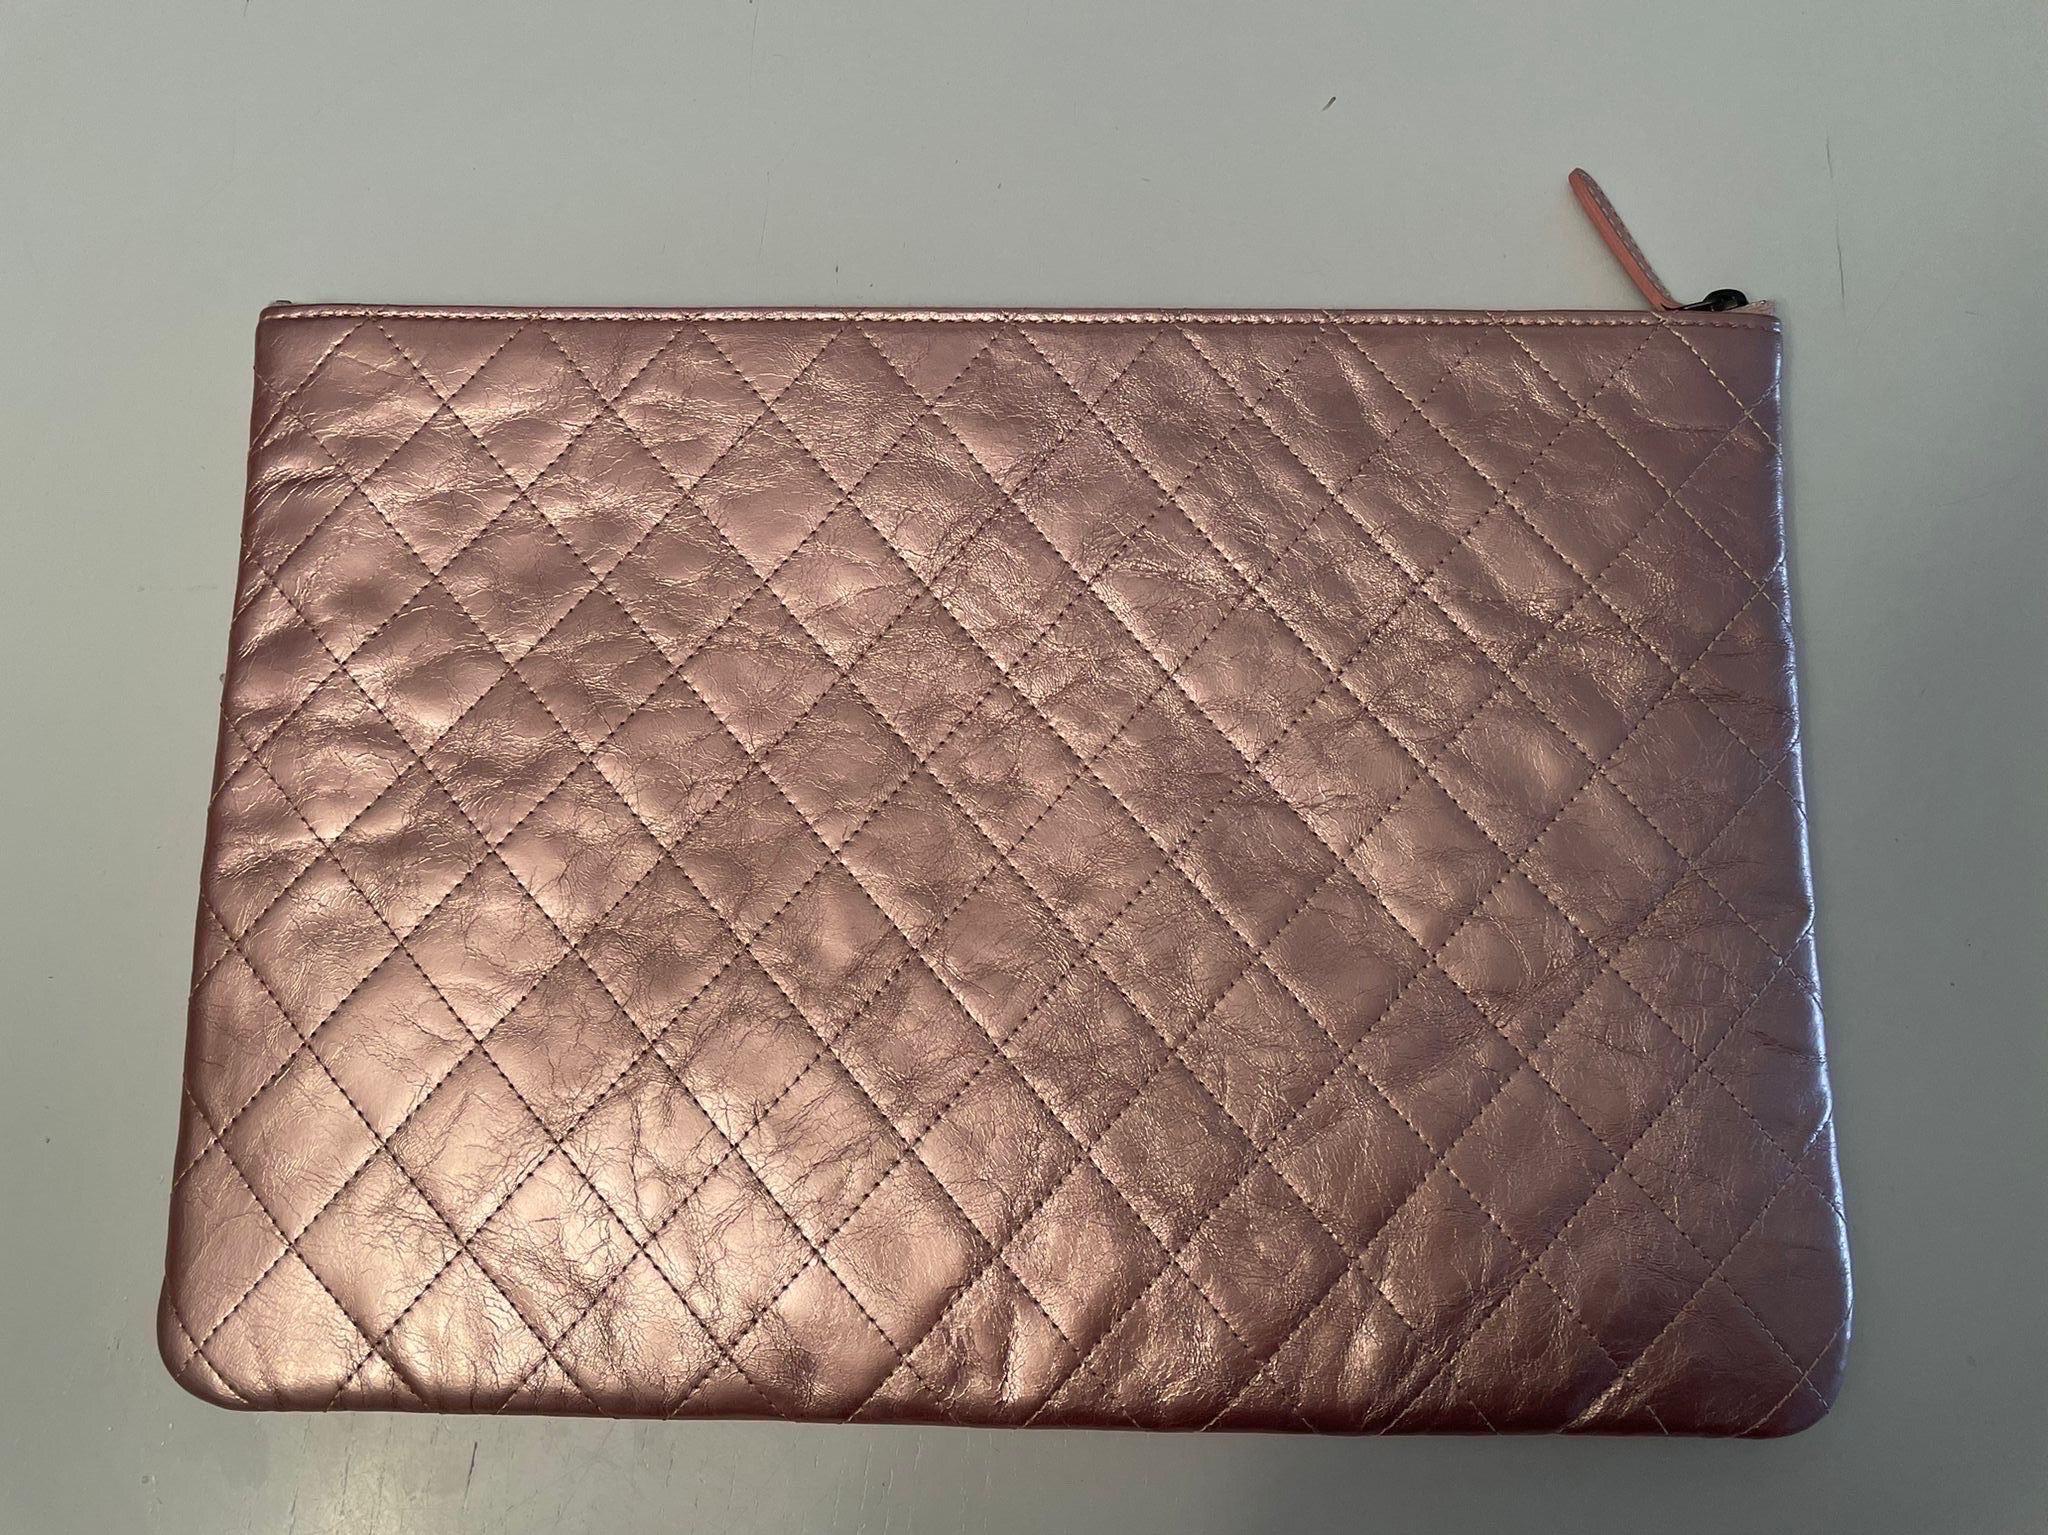 Chanel clutch bag.
Metallic pink color. 
Zip closure. Silver Chanel logo. 
Measurements: 
35cmX24 cm.
Conditions: excellent. As good as new.
It comes with original card and dust bag